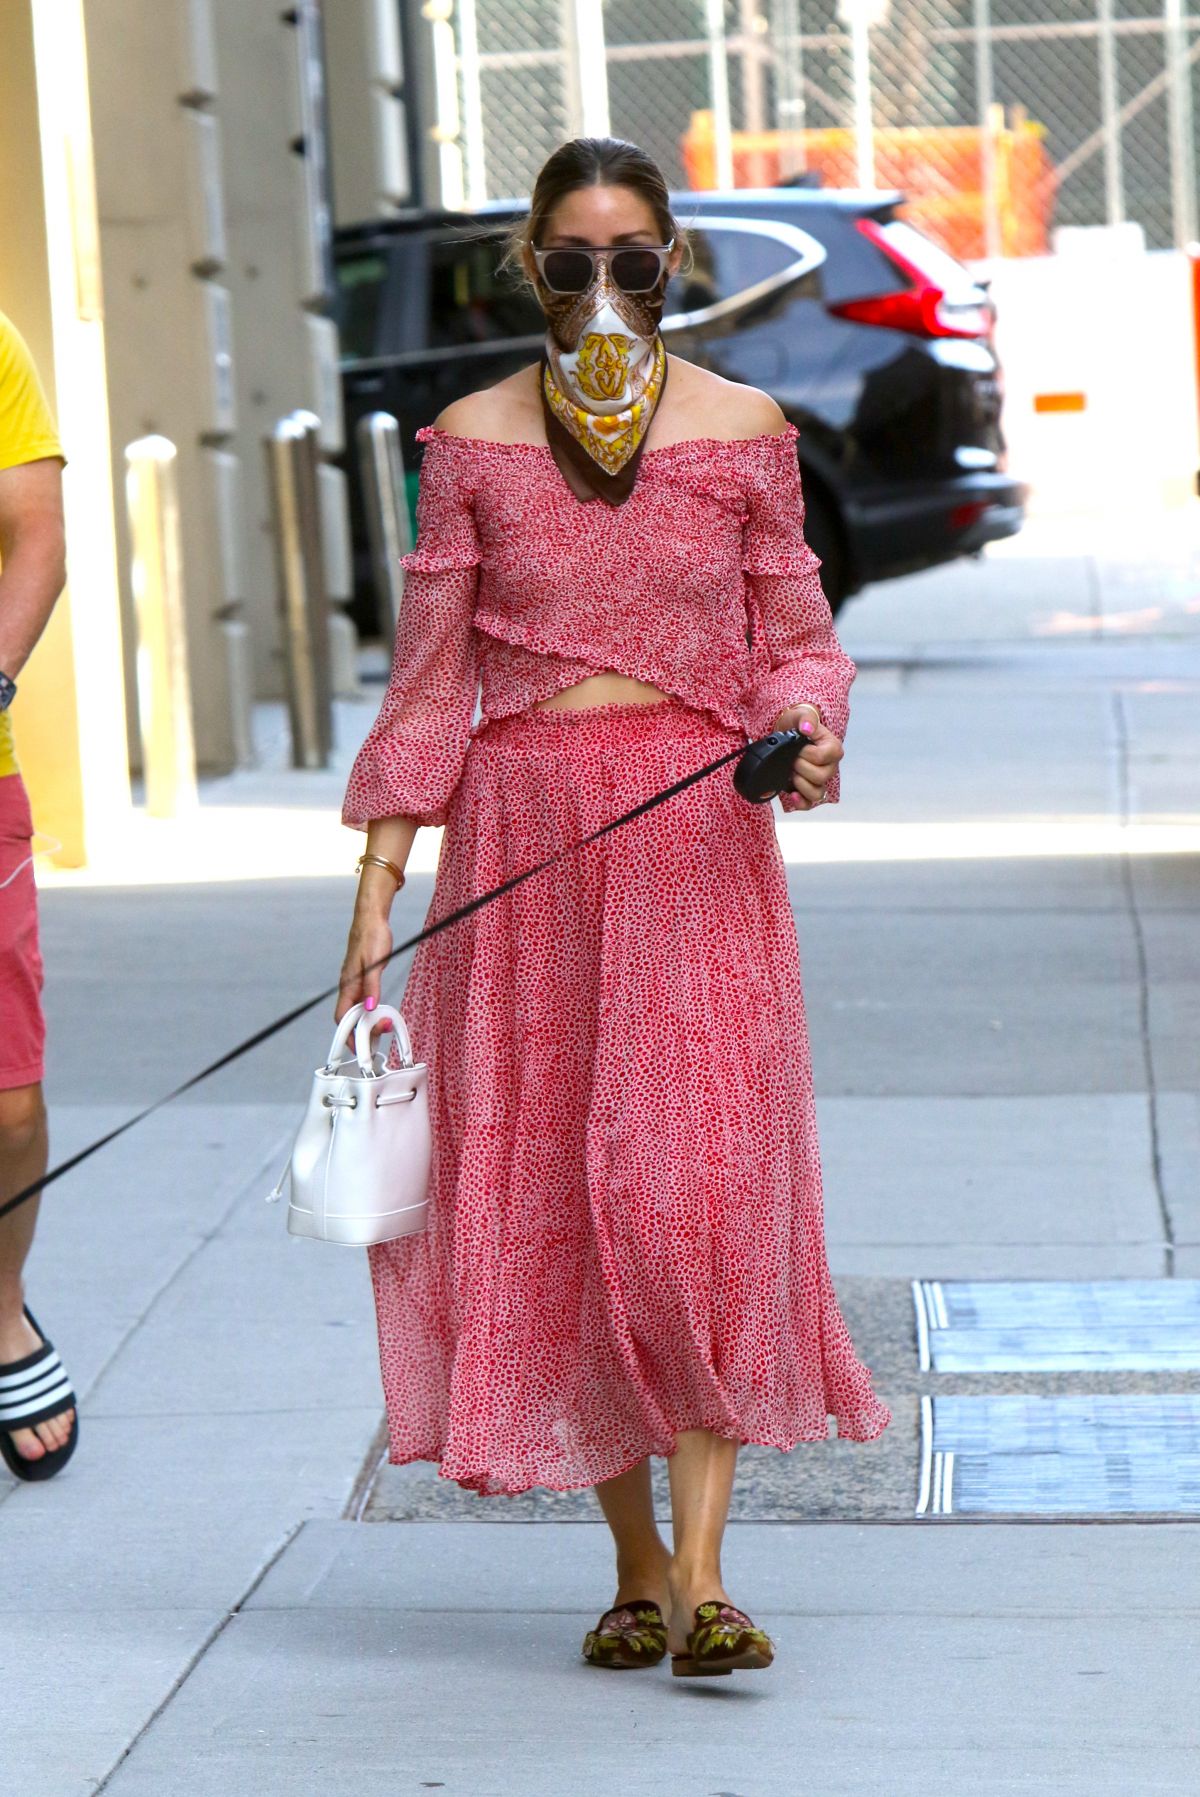 olivia-palermo-out-with-her-dog-in-brooklyn-07-26-2020-3.jpg